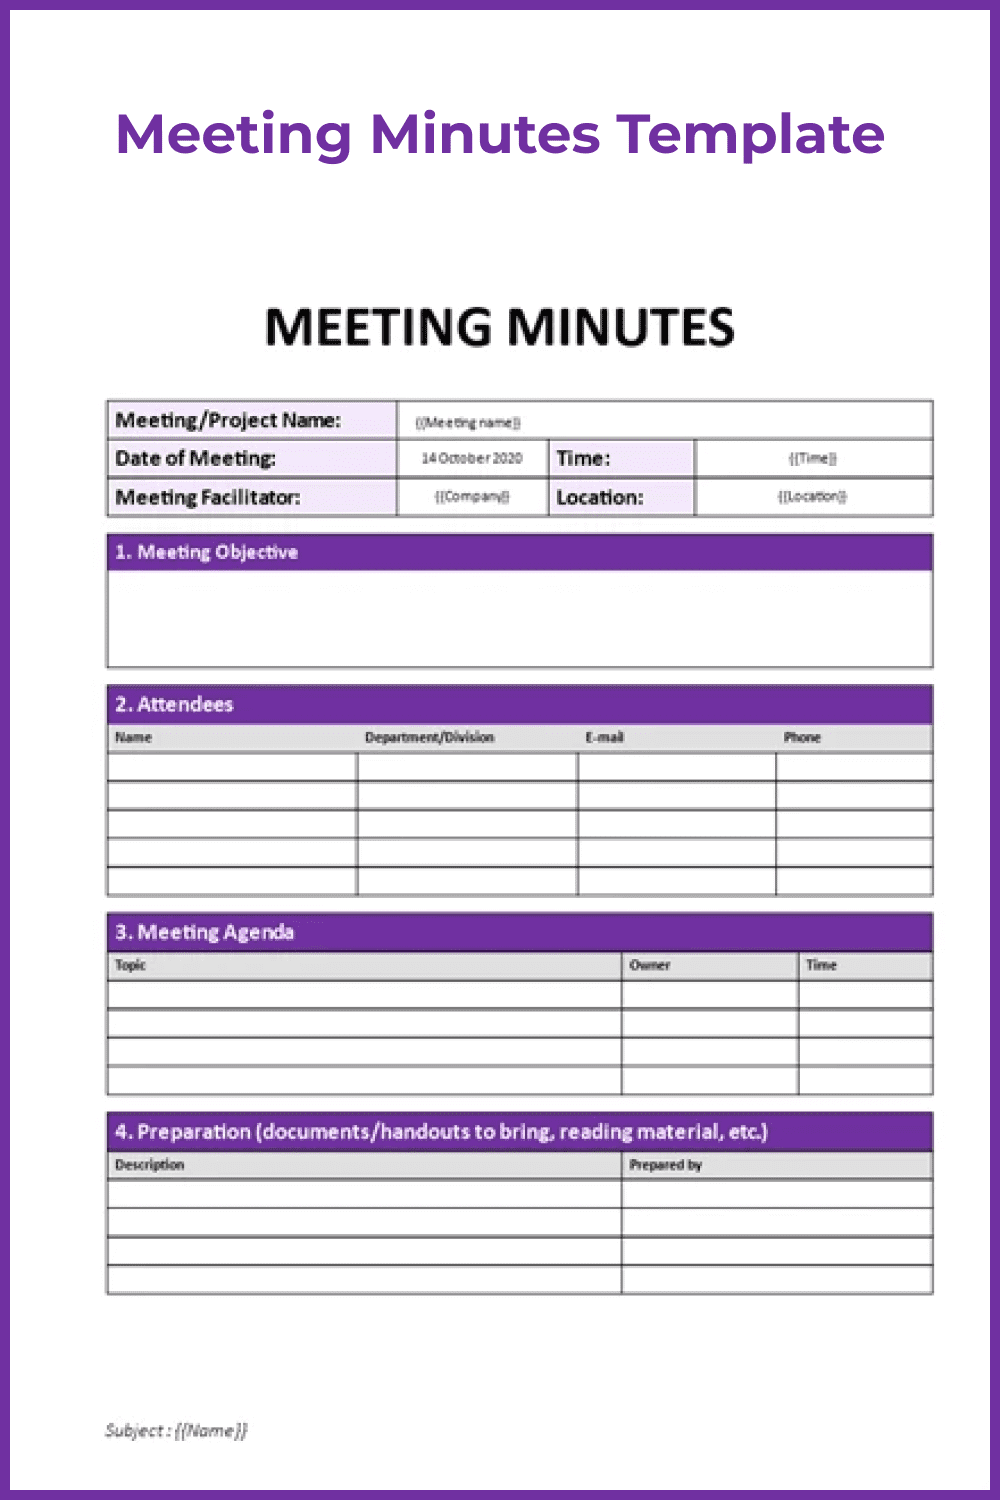 how-to-design-meeting-minutes-template-in-word-meeting-minutes